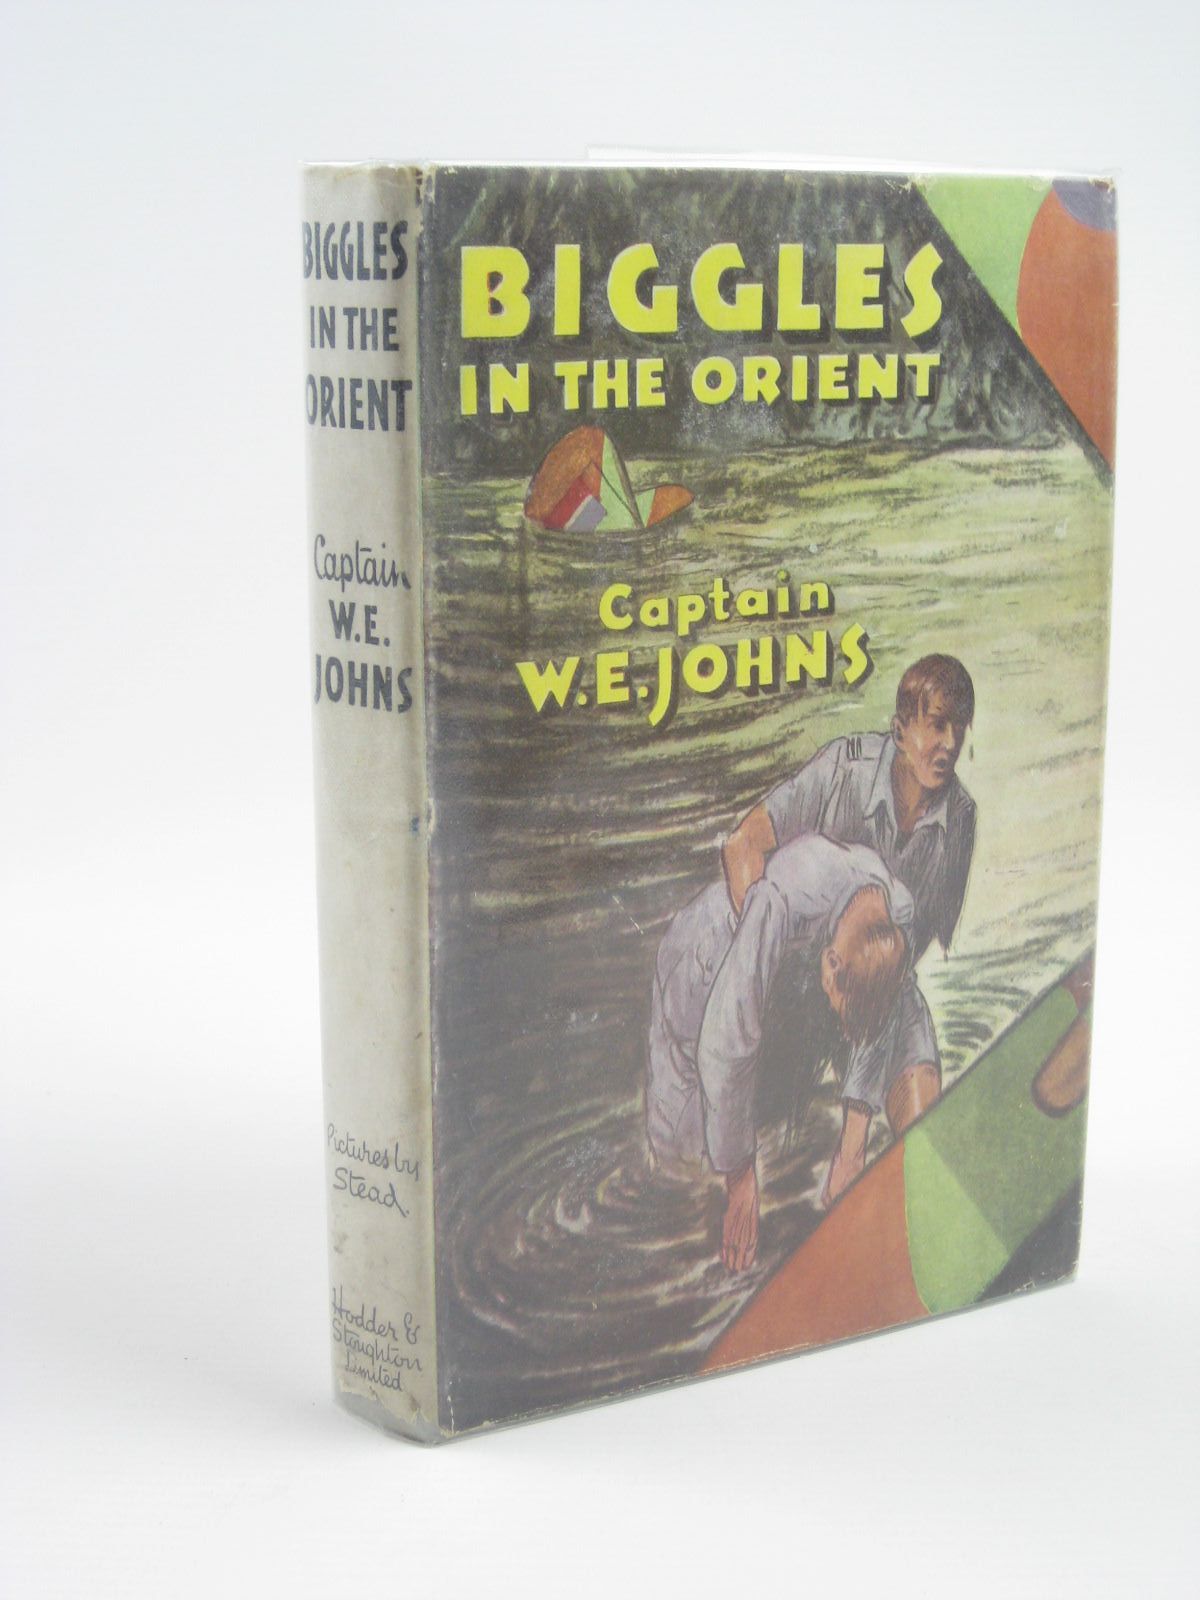 Cover of BIGGLES IN THE ORIENT by W.E. Johns